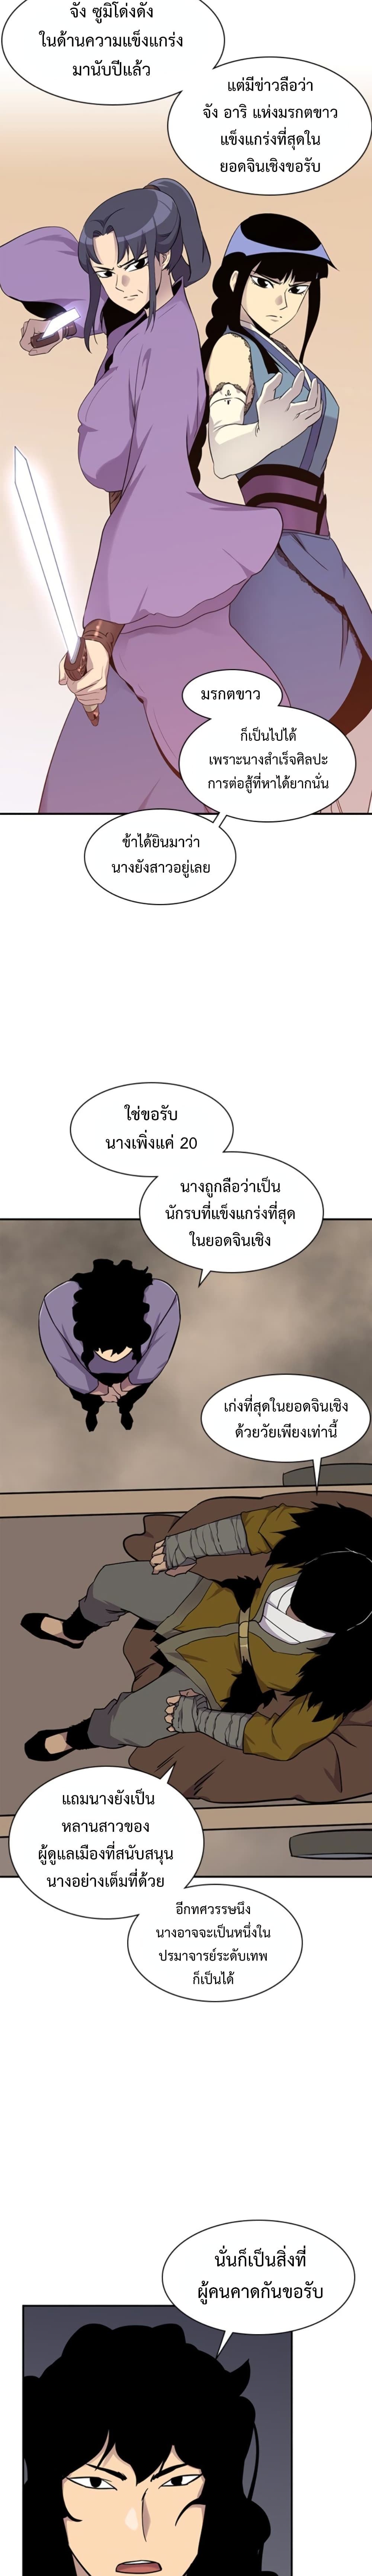 The Strongest Ever à¸à¸­à¸à¸à¸µà¹ 26 (24)